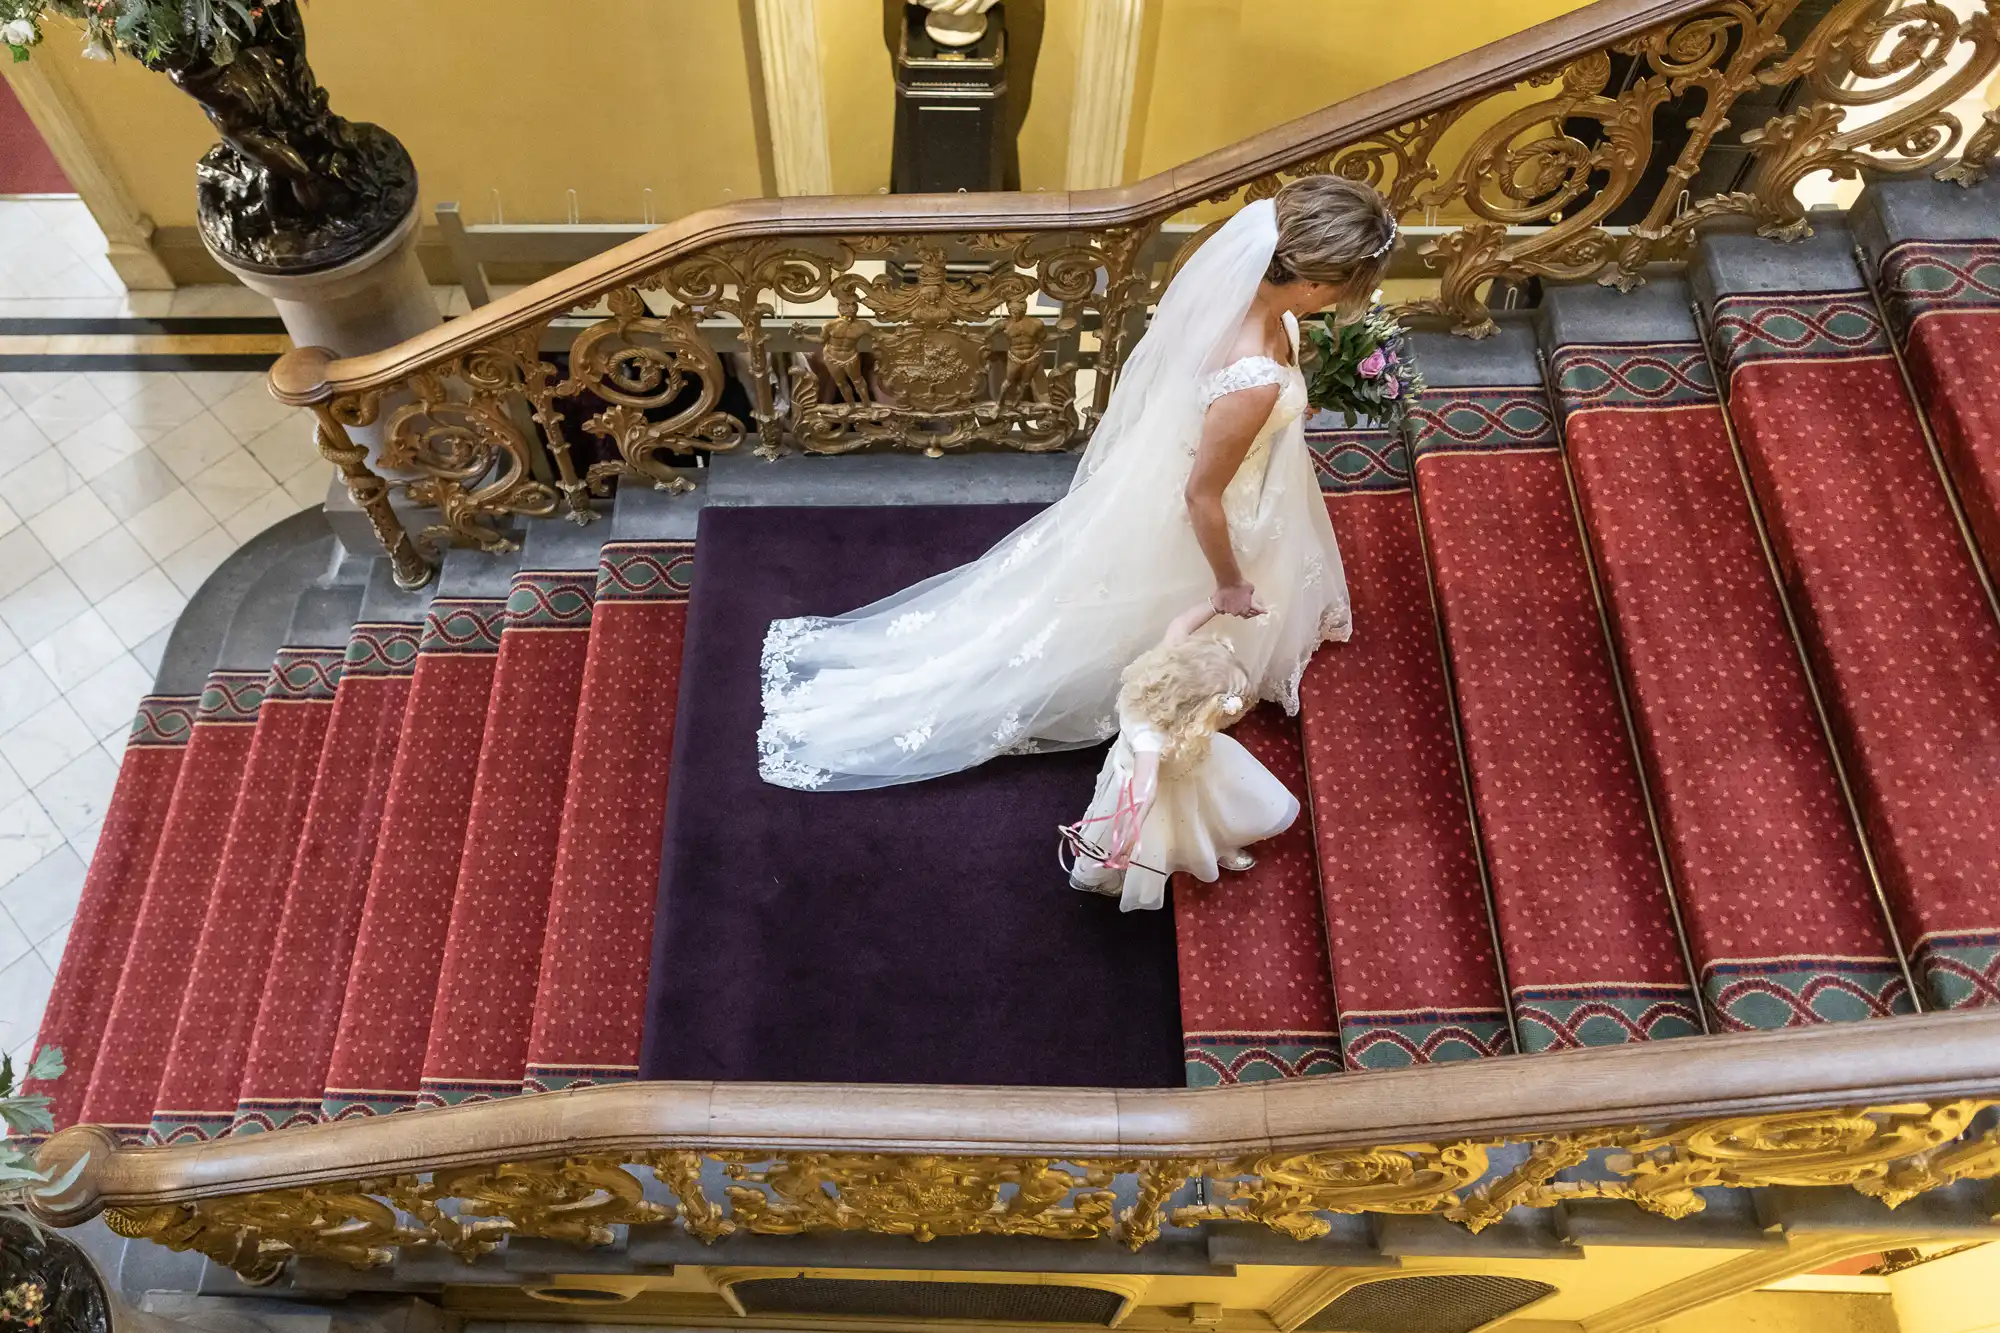 A bride in a white gown and veil walks up a grand staircase with a young flower girl, both holding hands. The staircase has red carpet and ornate golden railing.